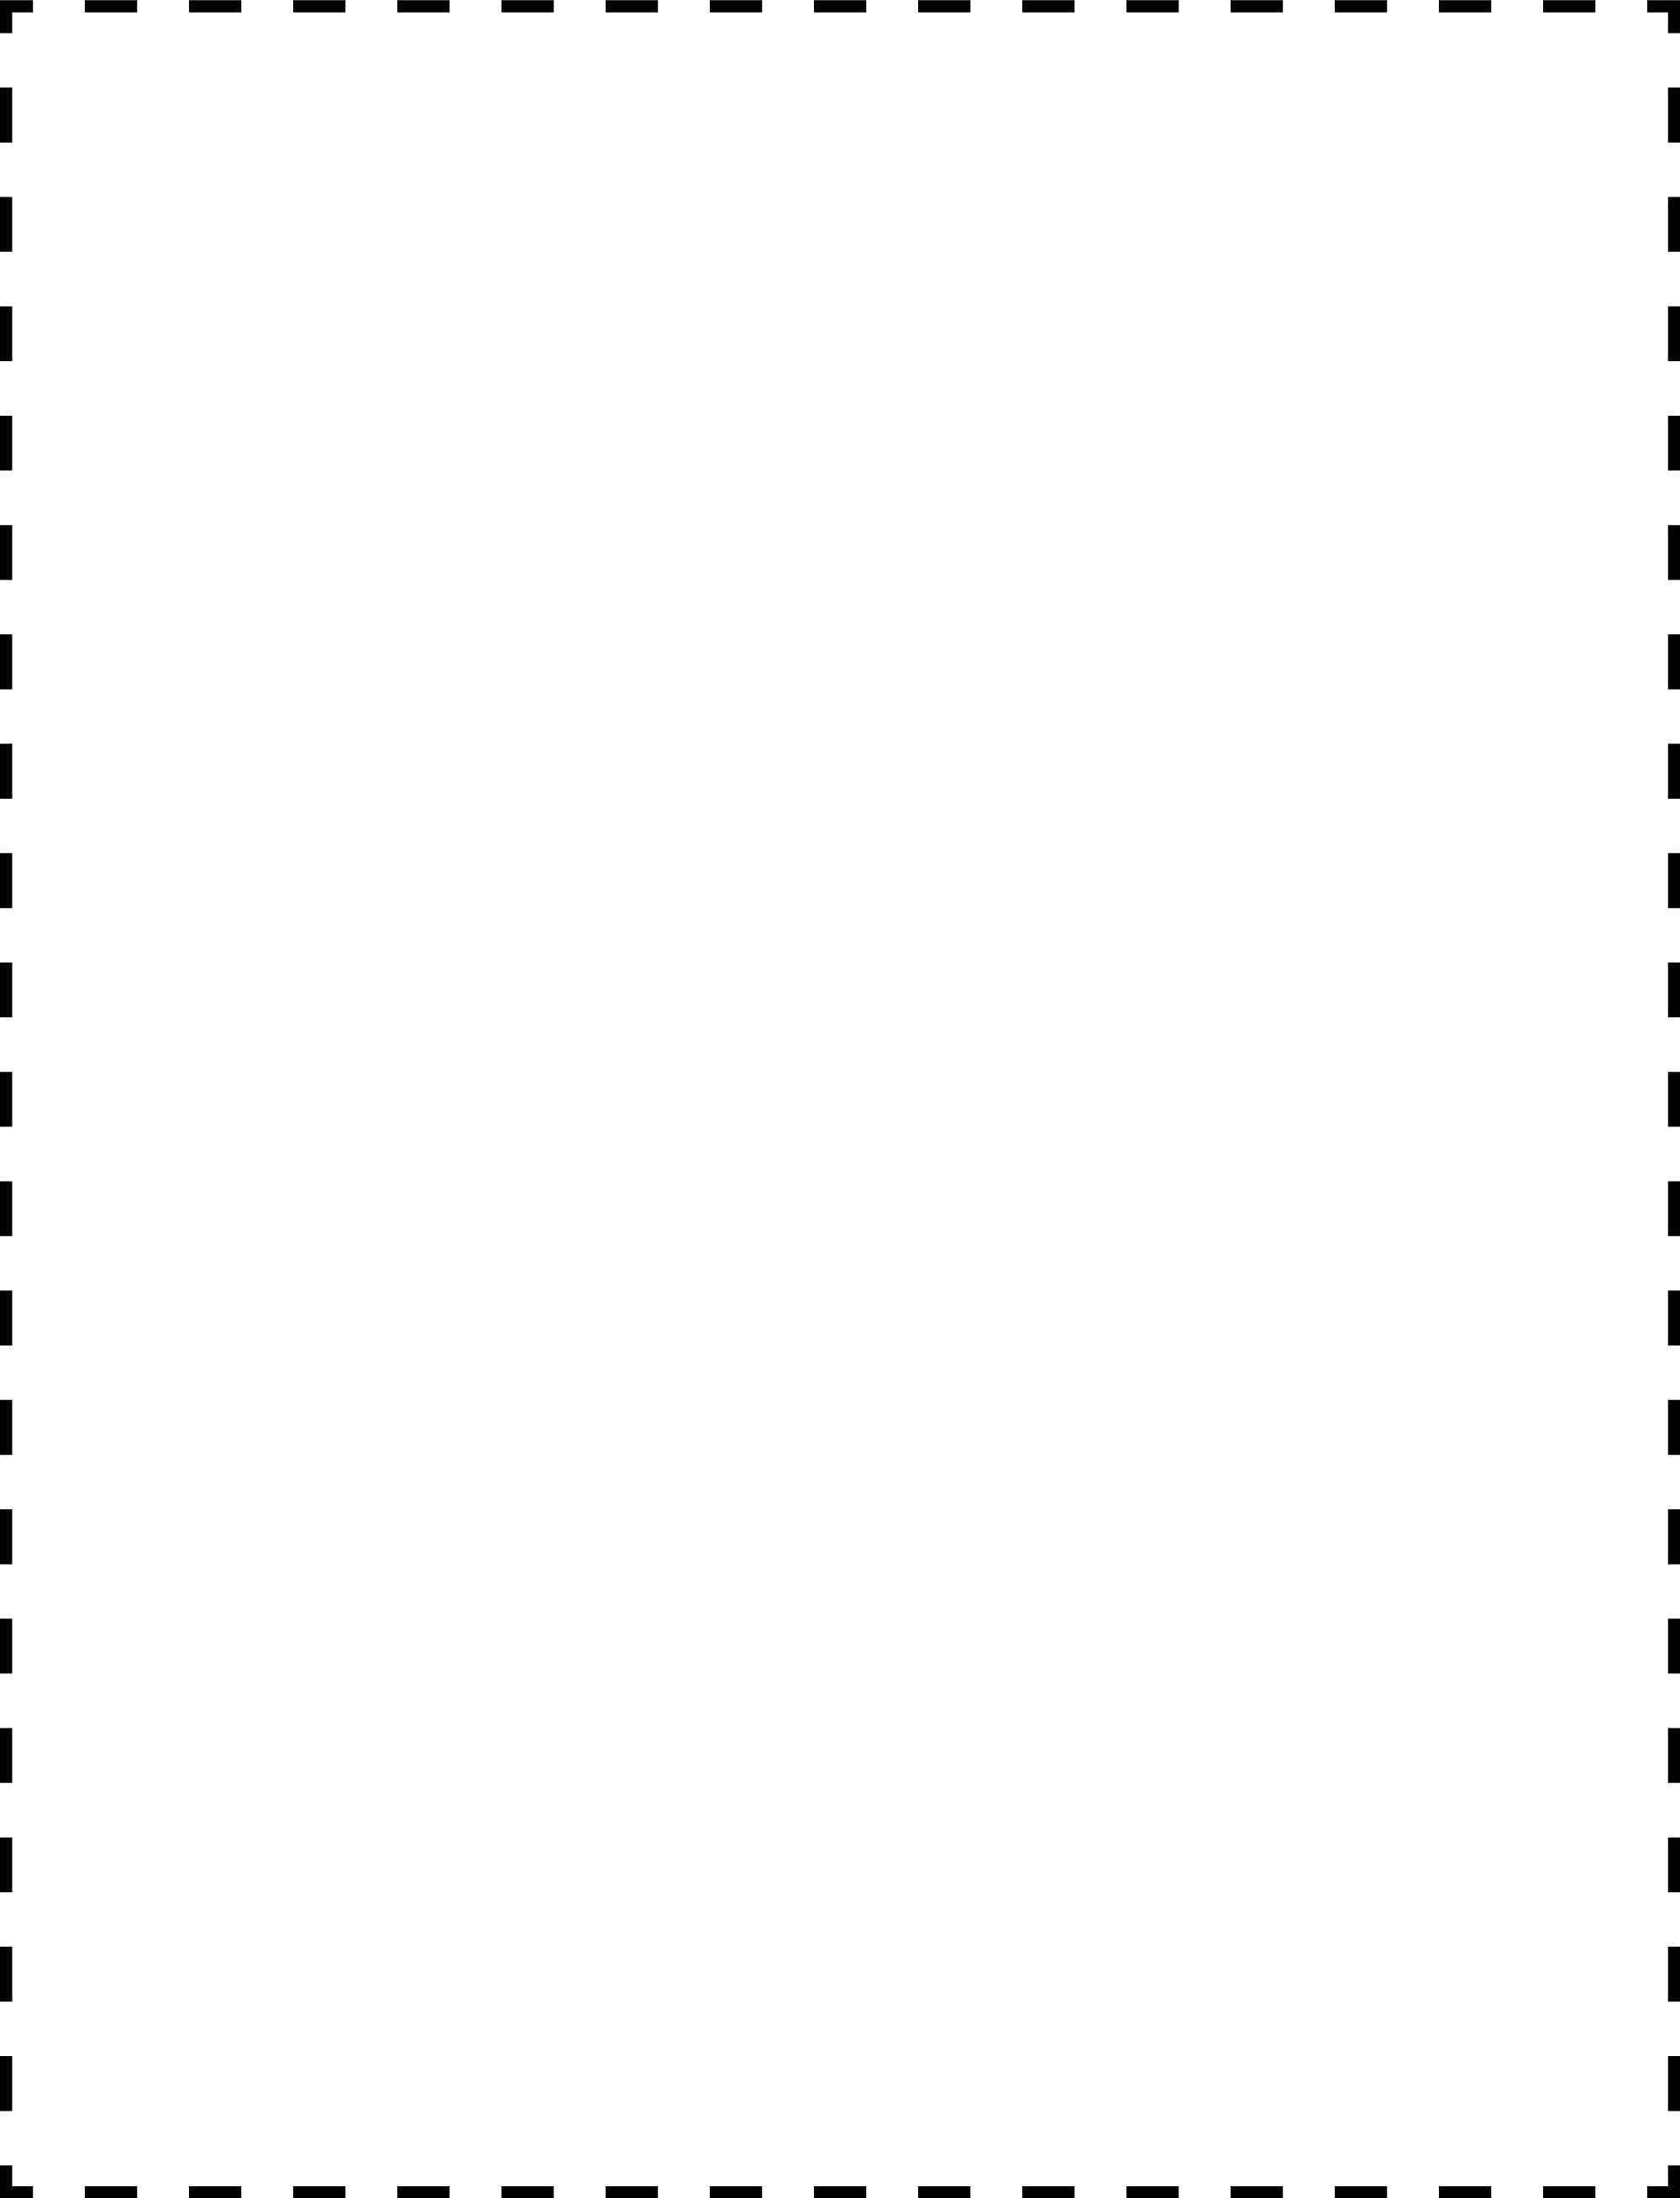 531-2034-coupon-outline-4x5-k.png